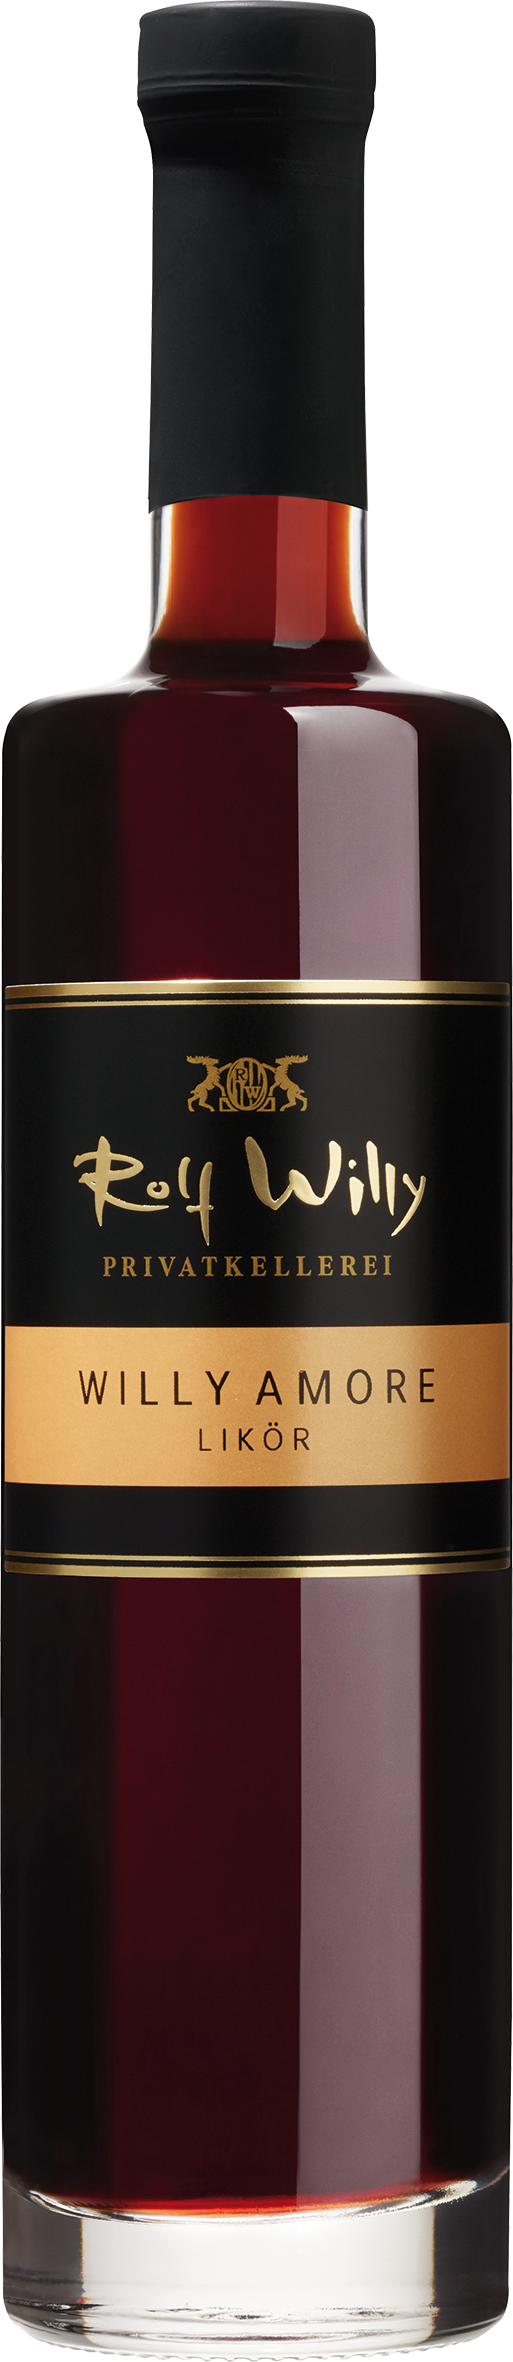 Willy Amore Likör